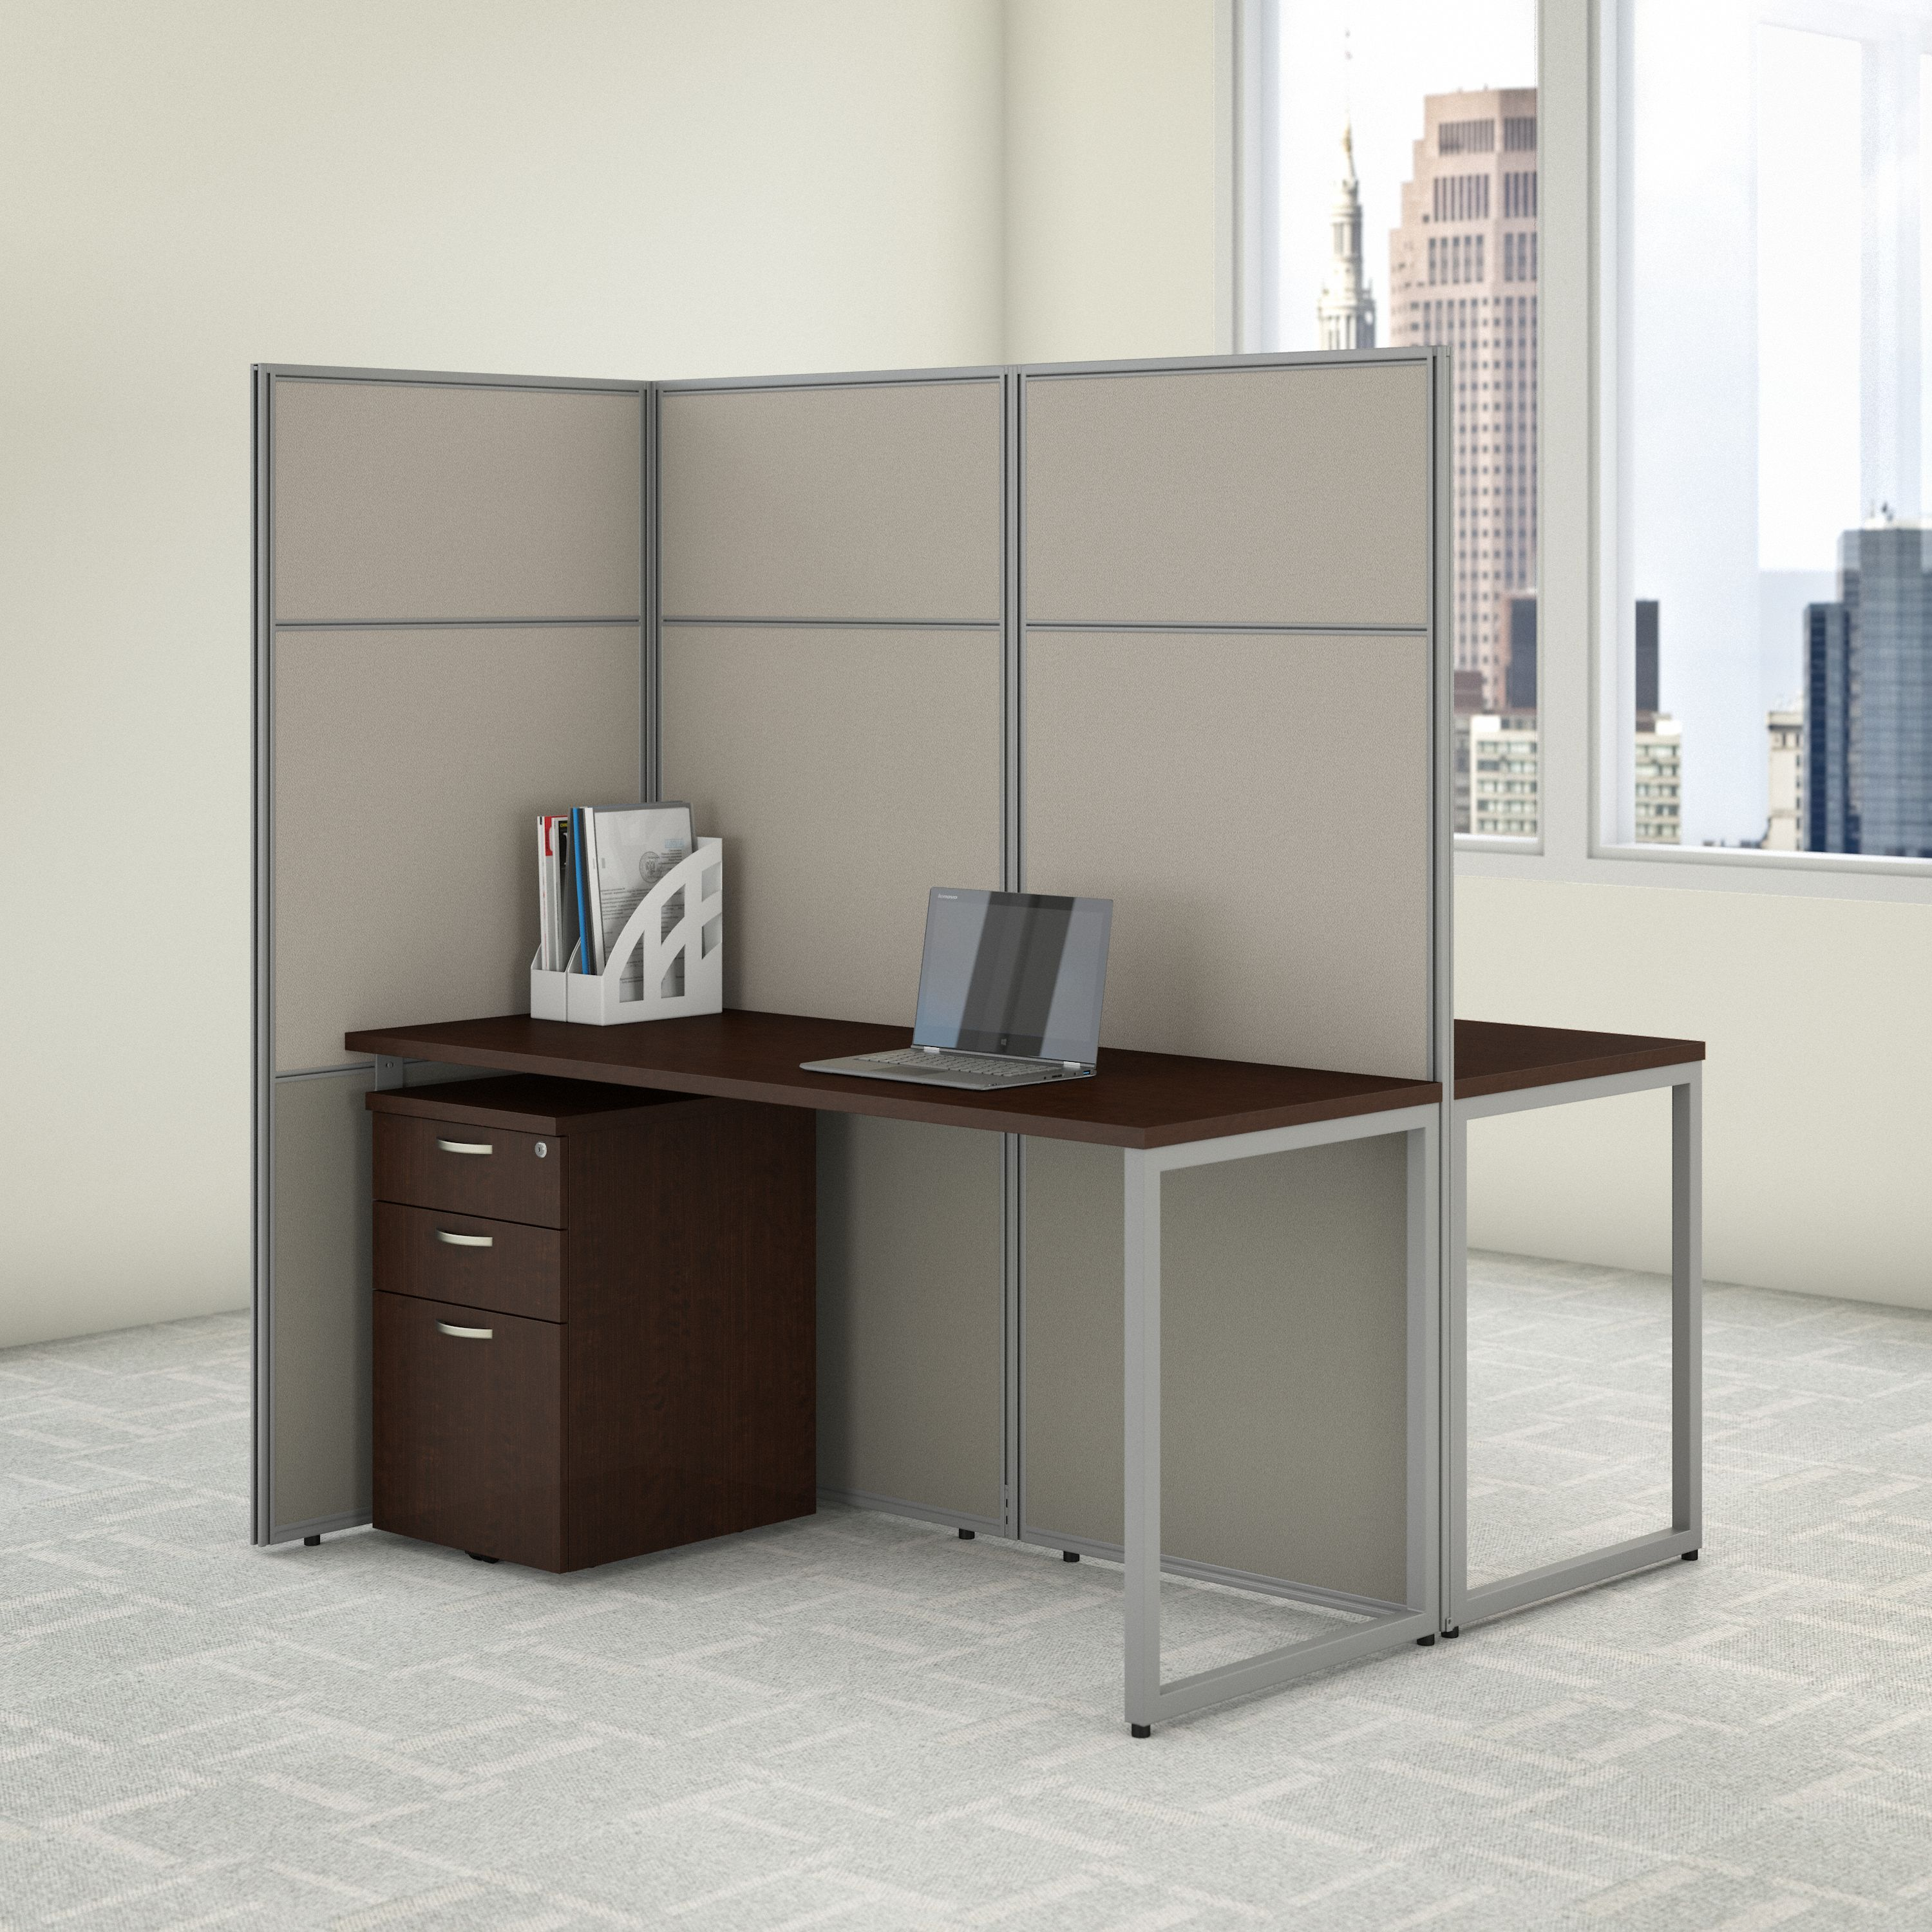 Shop Bush Business Furniture Easy Office 60W 2 Person Cubicle Desk with File Cabinets and 66H Panels 01 EODH46SMR-03K #color_mocha cherry